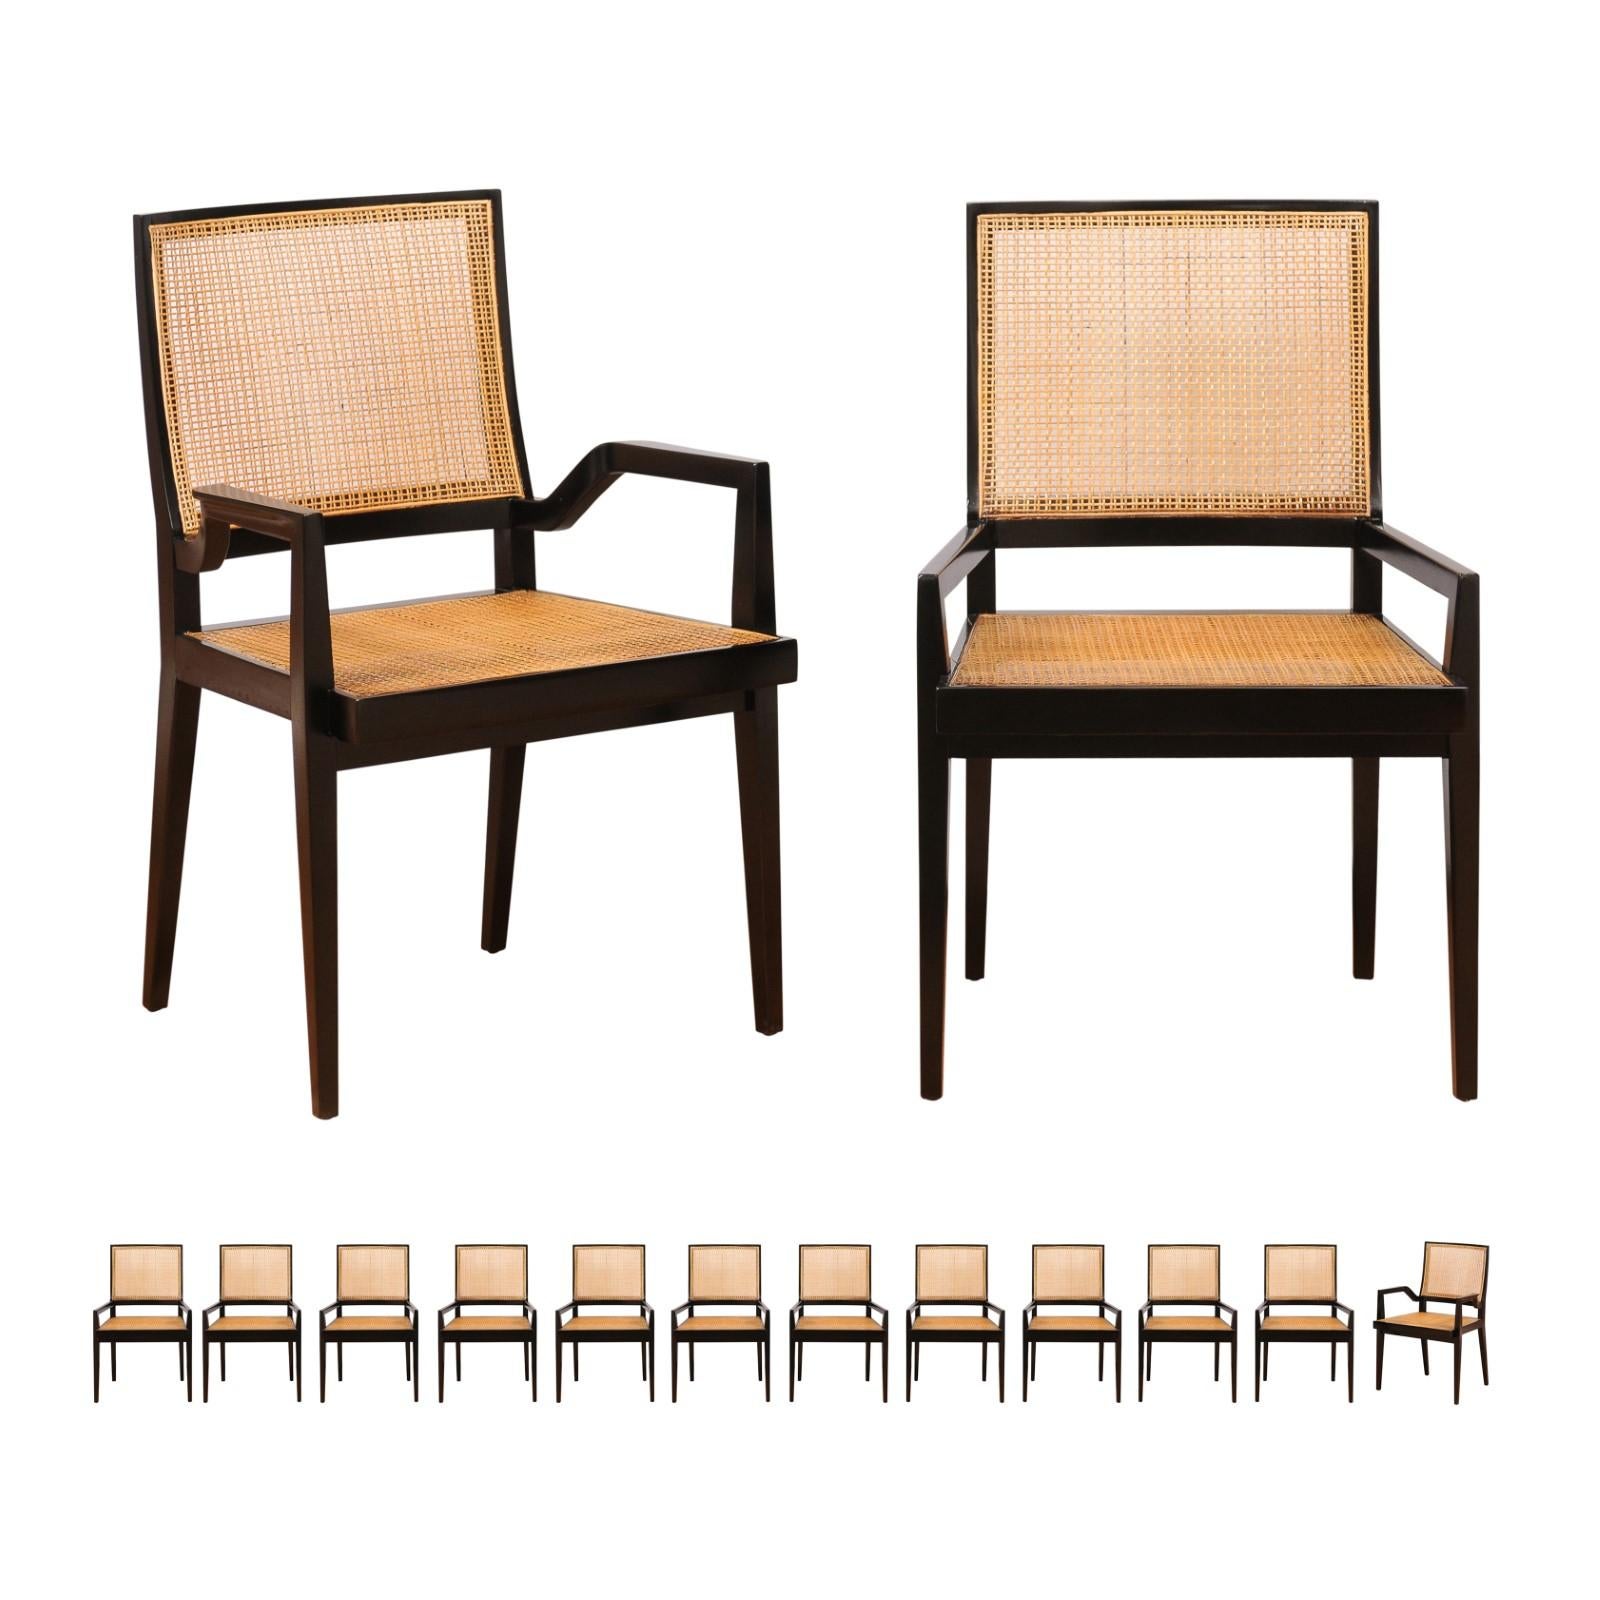 This large restored set of impossible to find seating examples is unique on the World market. These magnificent dining chairs are shipped as professionally photographed and described in the listing narrative: meticulously professionally restored and